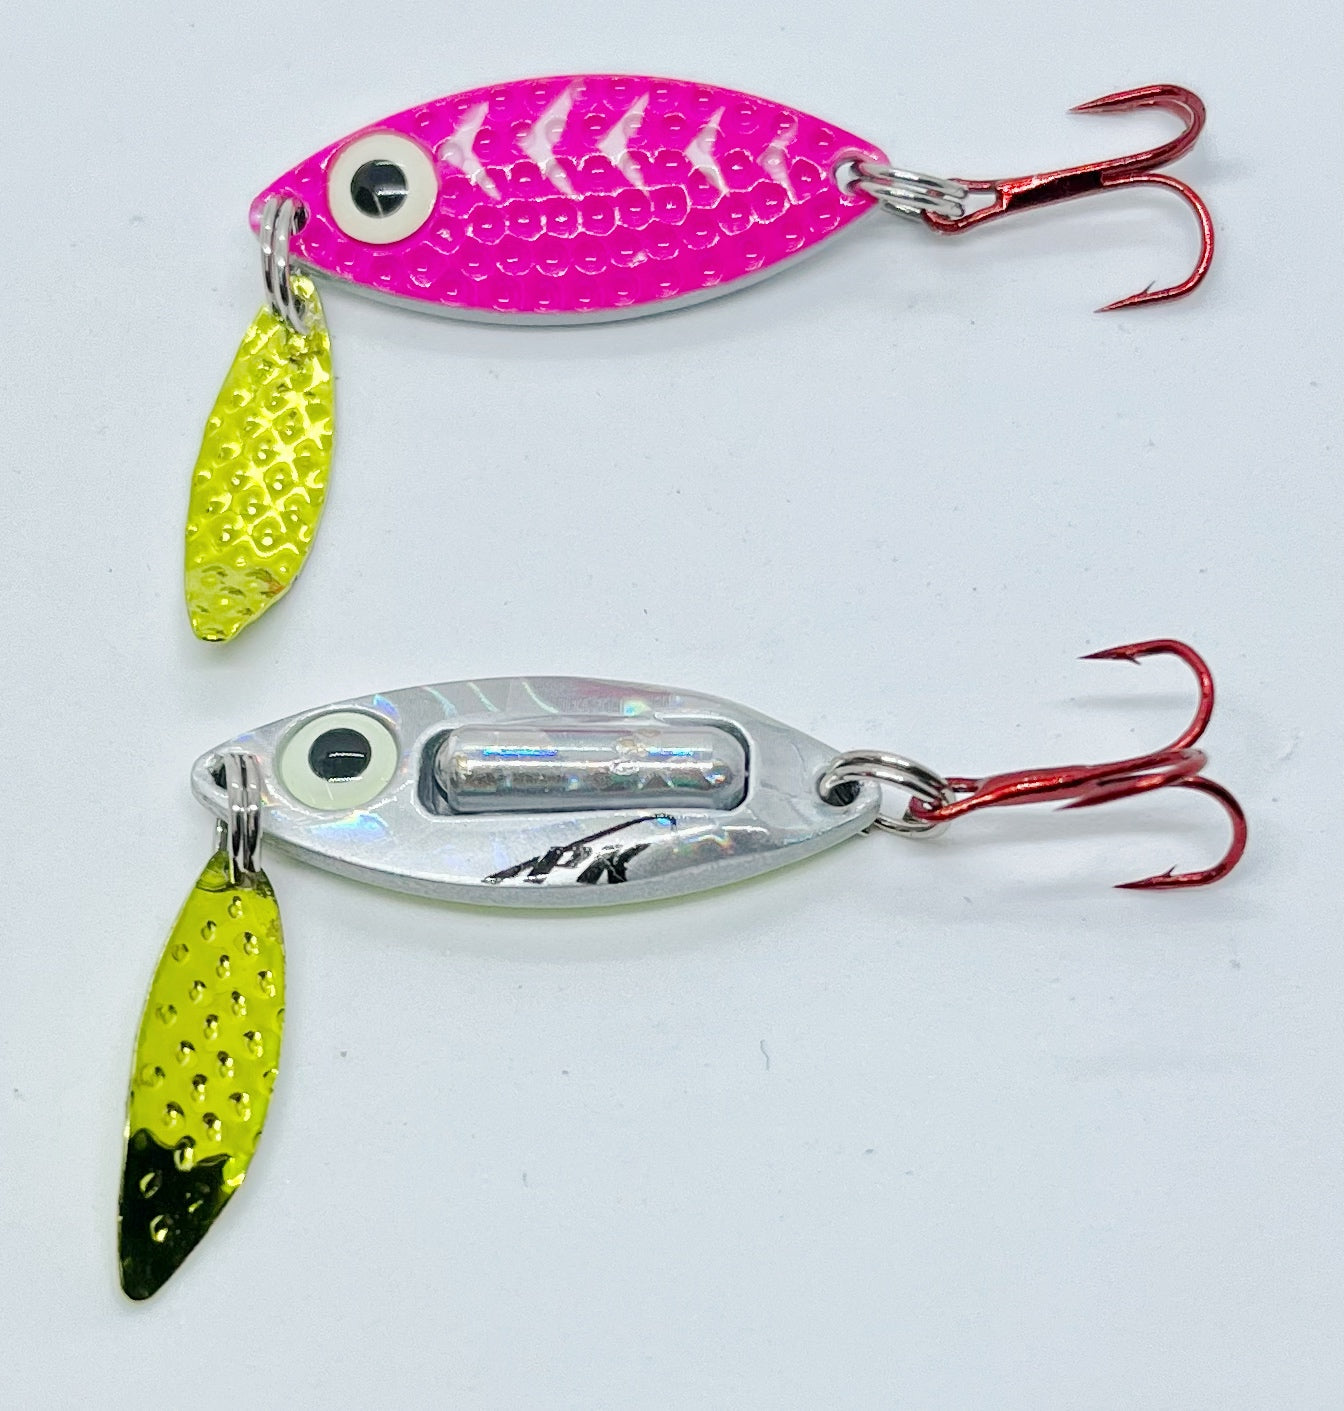  BESPORTBLE 5pcs Bait Rattle Lure Twitching Lures